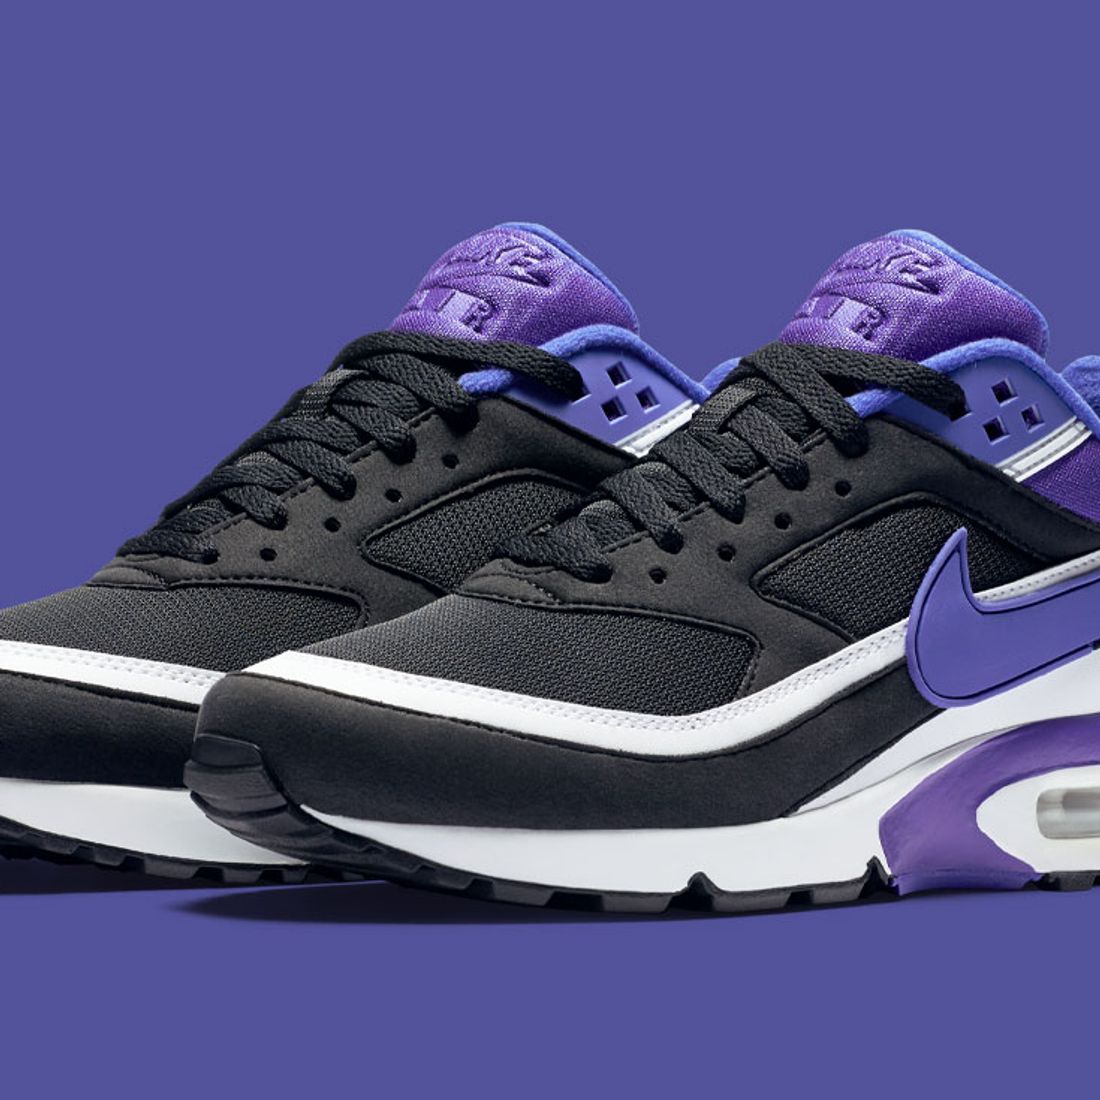 The Nike Air Max 90 Is Returning In Its Original Shape For Its 30th  Anniversary